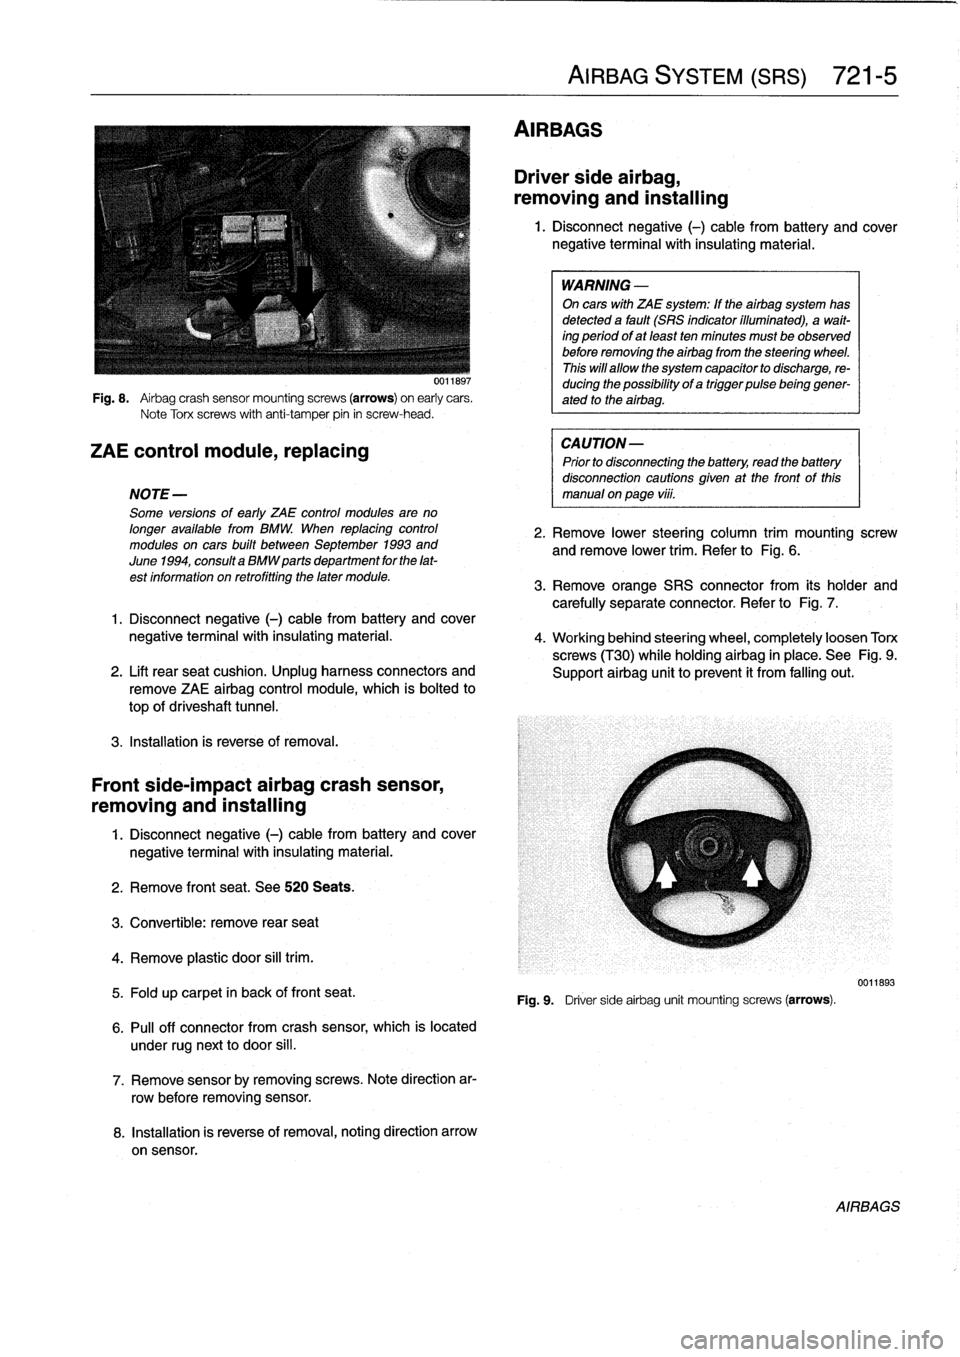 BMW 328i 1994 E36 User Guide 
Fig
.
8
.

	

Airbag
crash
sensor
mountingscrews
(arrows)
on
early
cars
.
Note
Torx
screws
with
anti-tamper
pin
in
screw-head
.

ZAE
control
module,
replacing

NOTE-

Some
versions
of
early
ZAE
contr